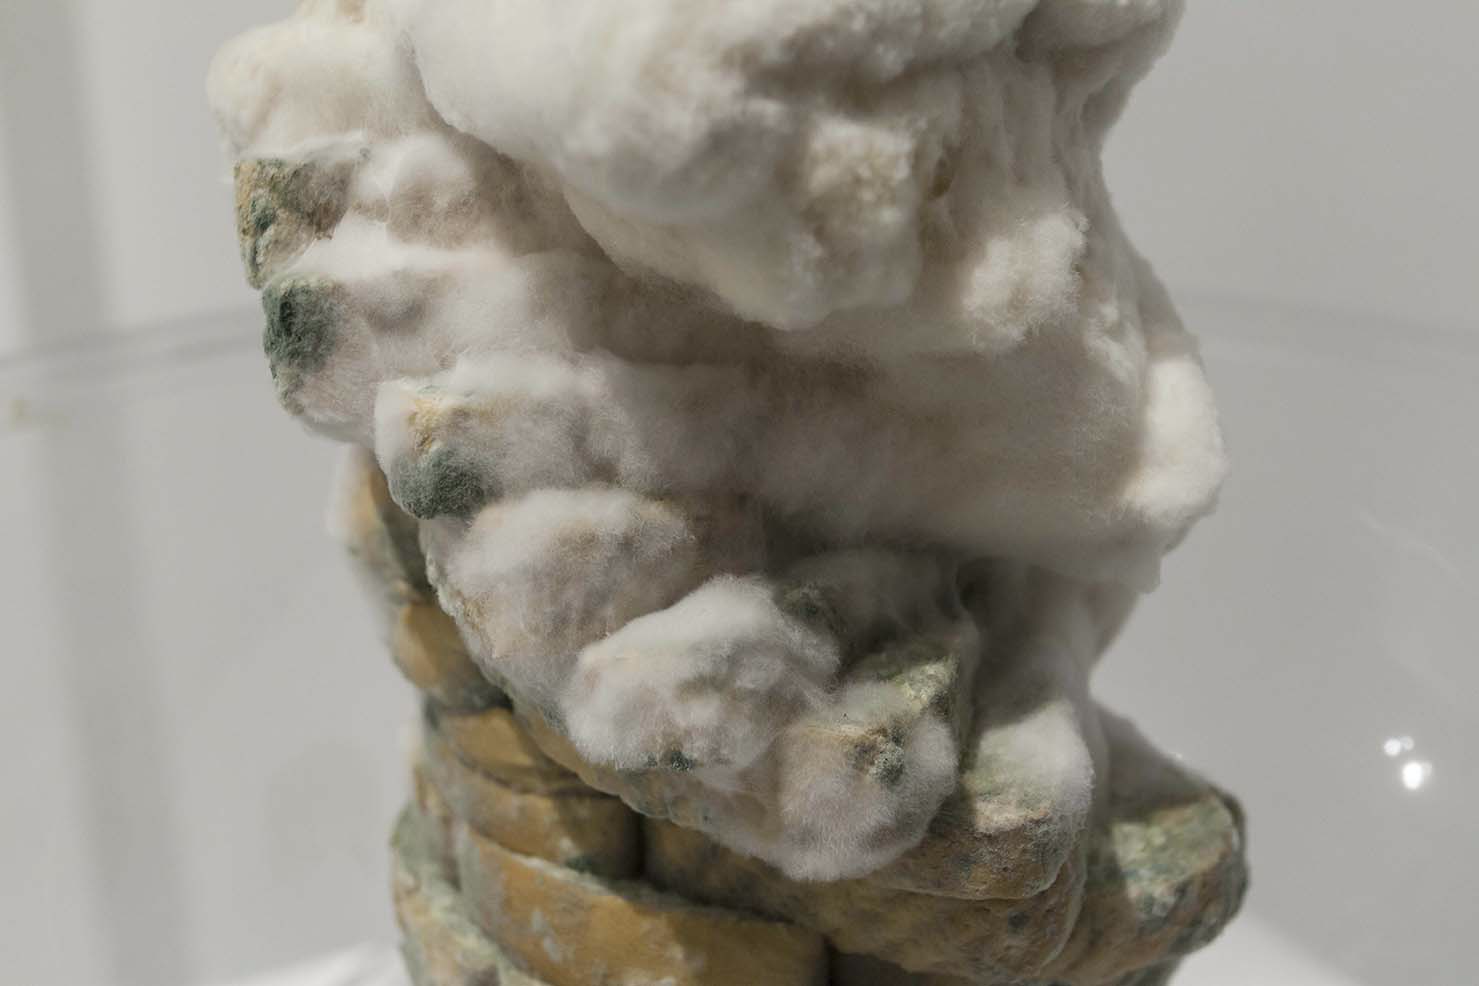 Closeup of “Rolling in the Dough” with actual bread mold